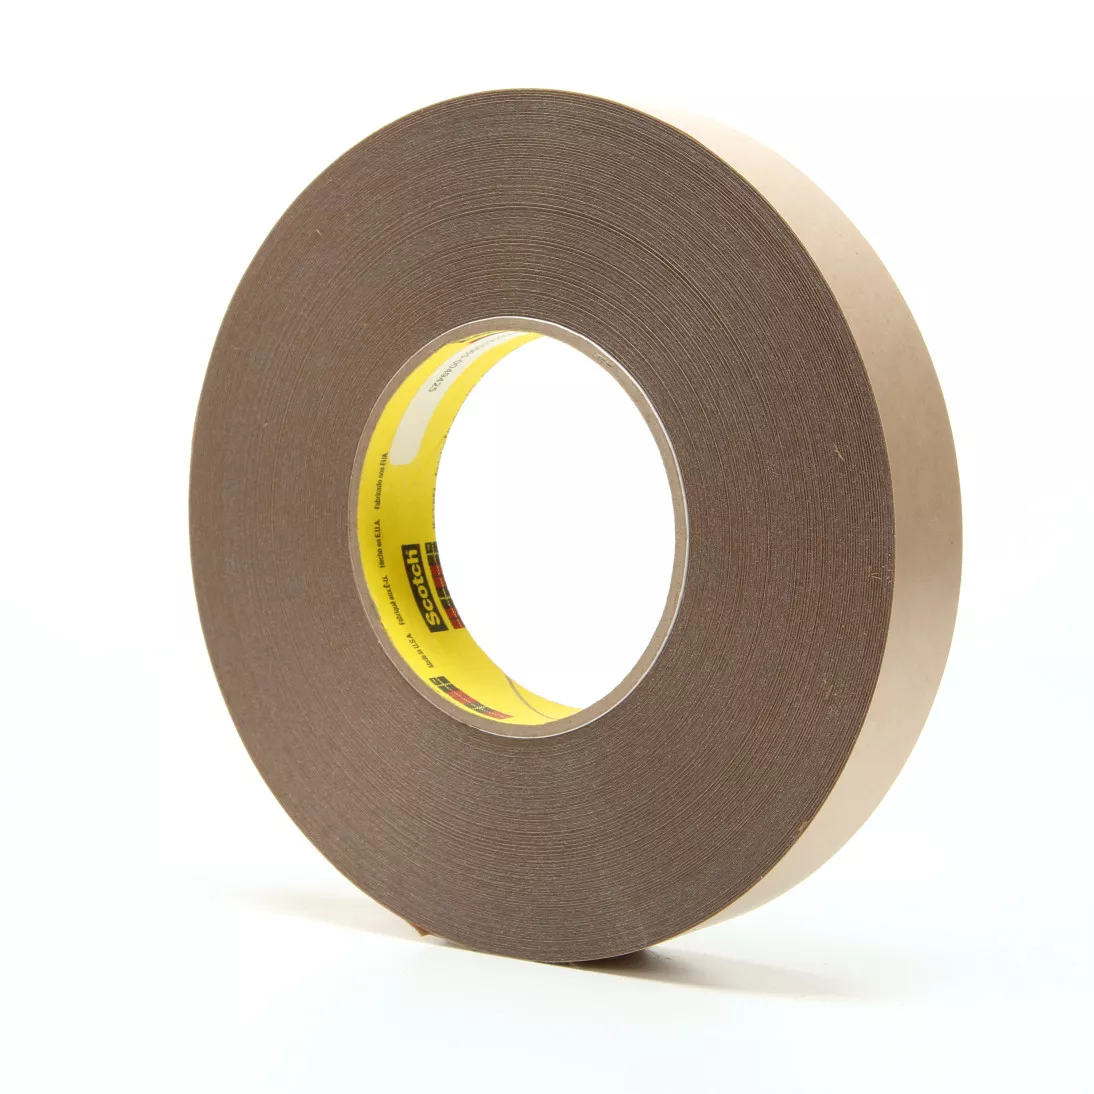 3M™ Removable Repositionable Tape 9425, Clear, 3 in x 72 yd, 5.8 mil, 3
rolls per case